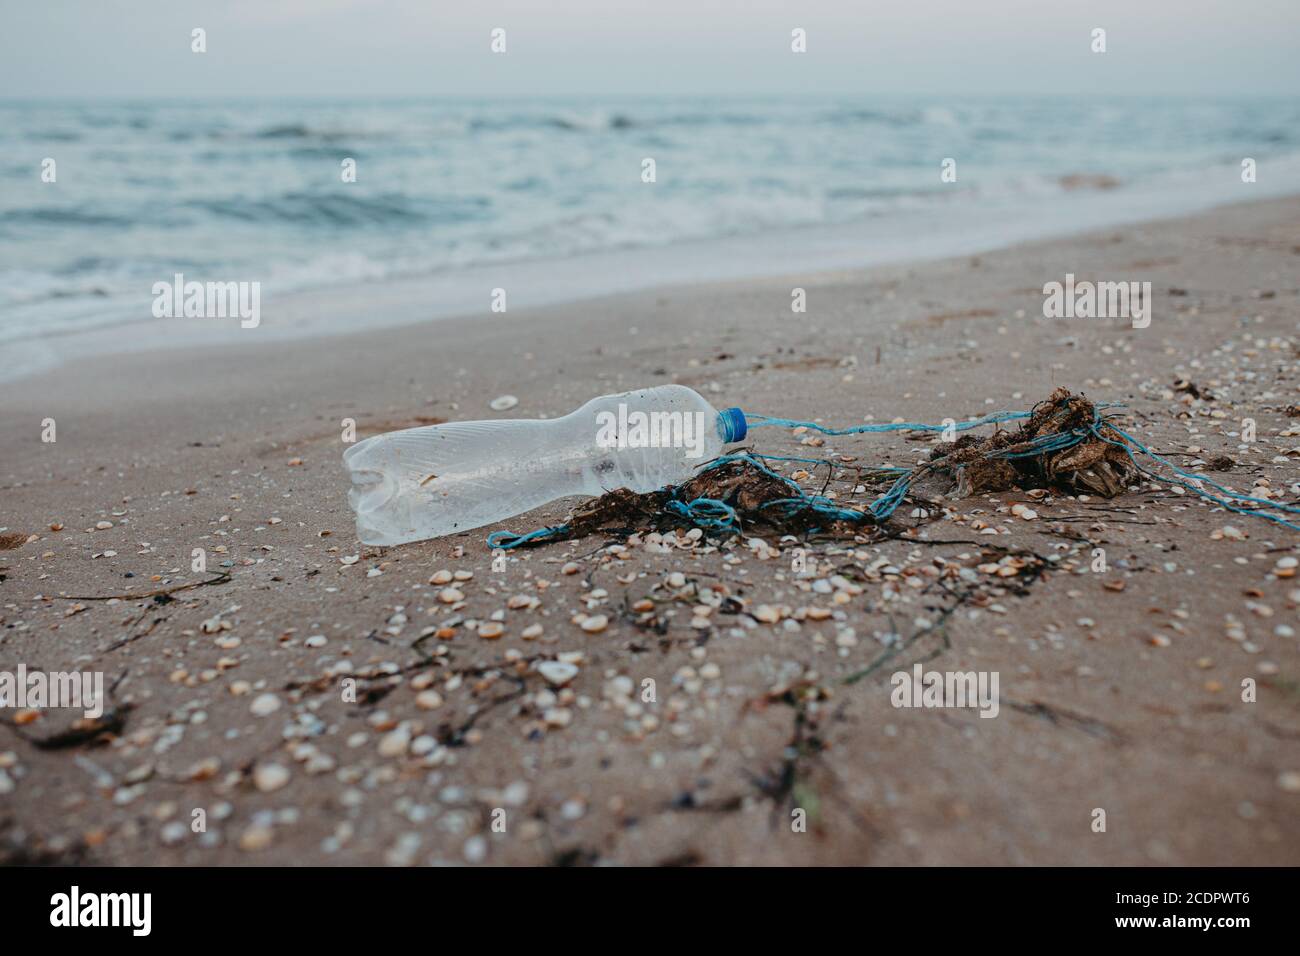 Discarded plastic pet bottle lying on the shoreline causing environmental plastic pollution. Garbage on the beach. Stock Photo